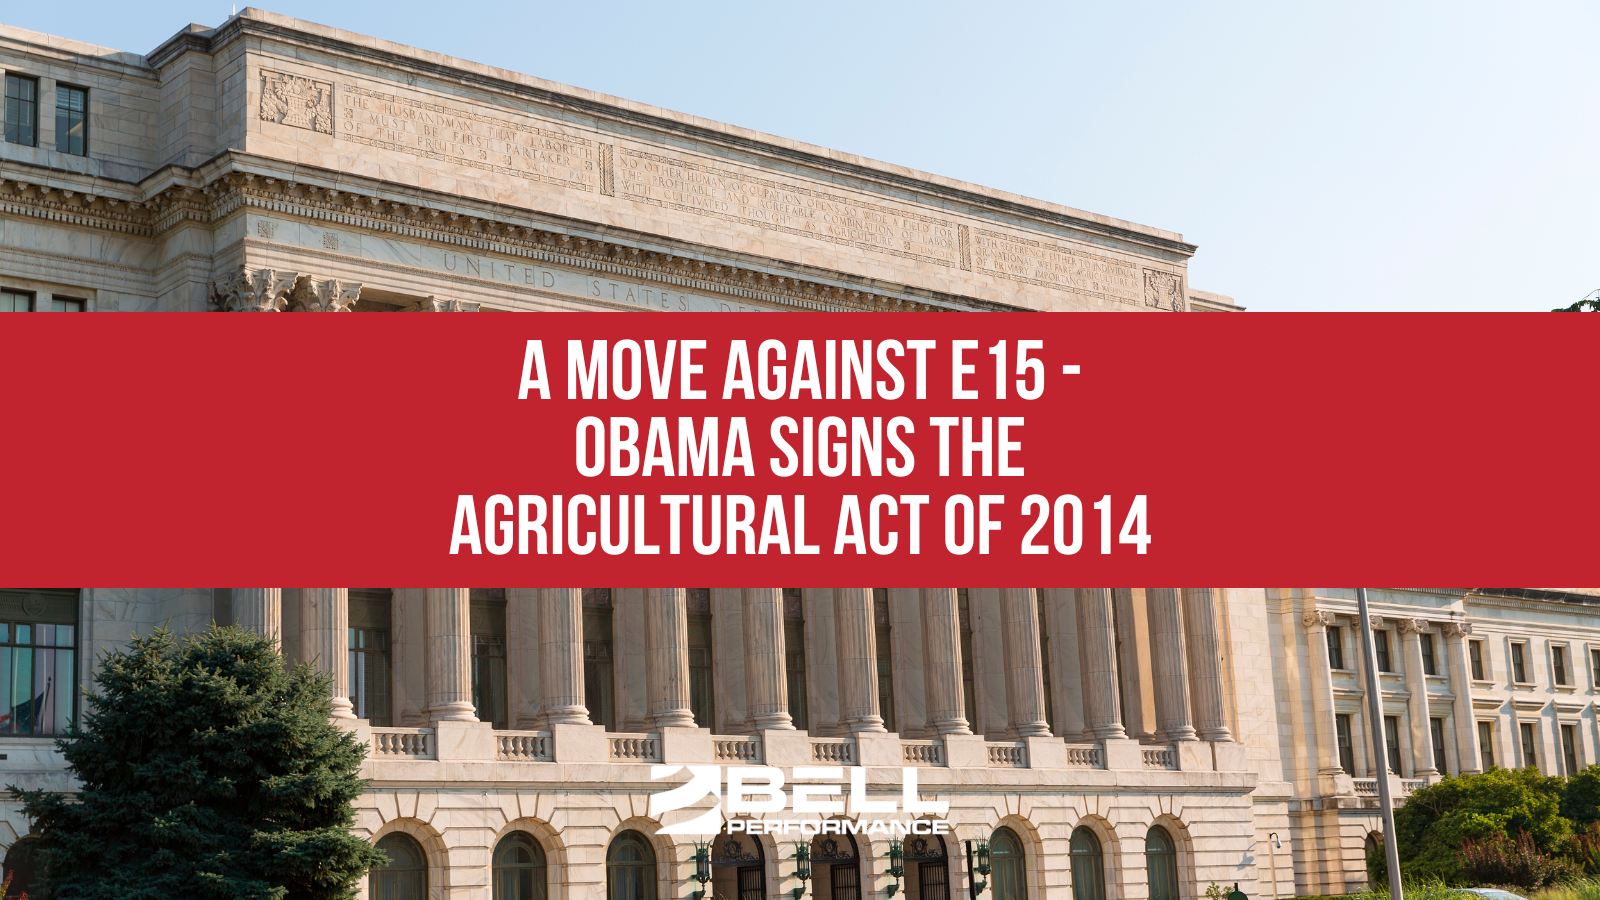 A move against E15 - Obama signs the Agricultural Act of 2014